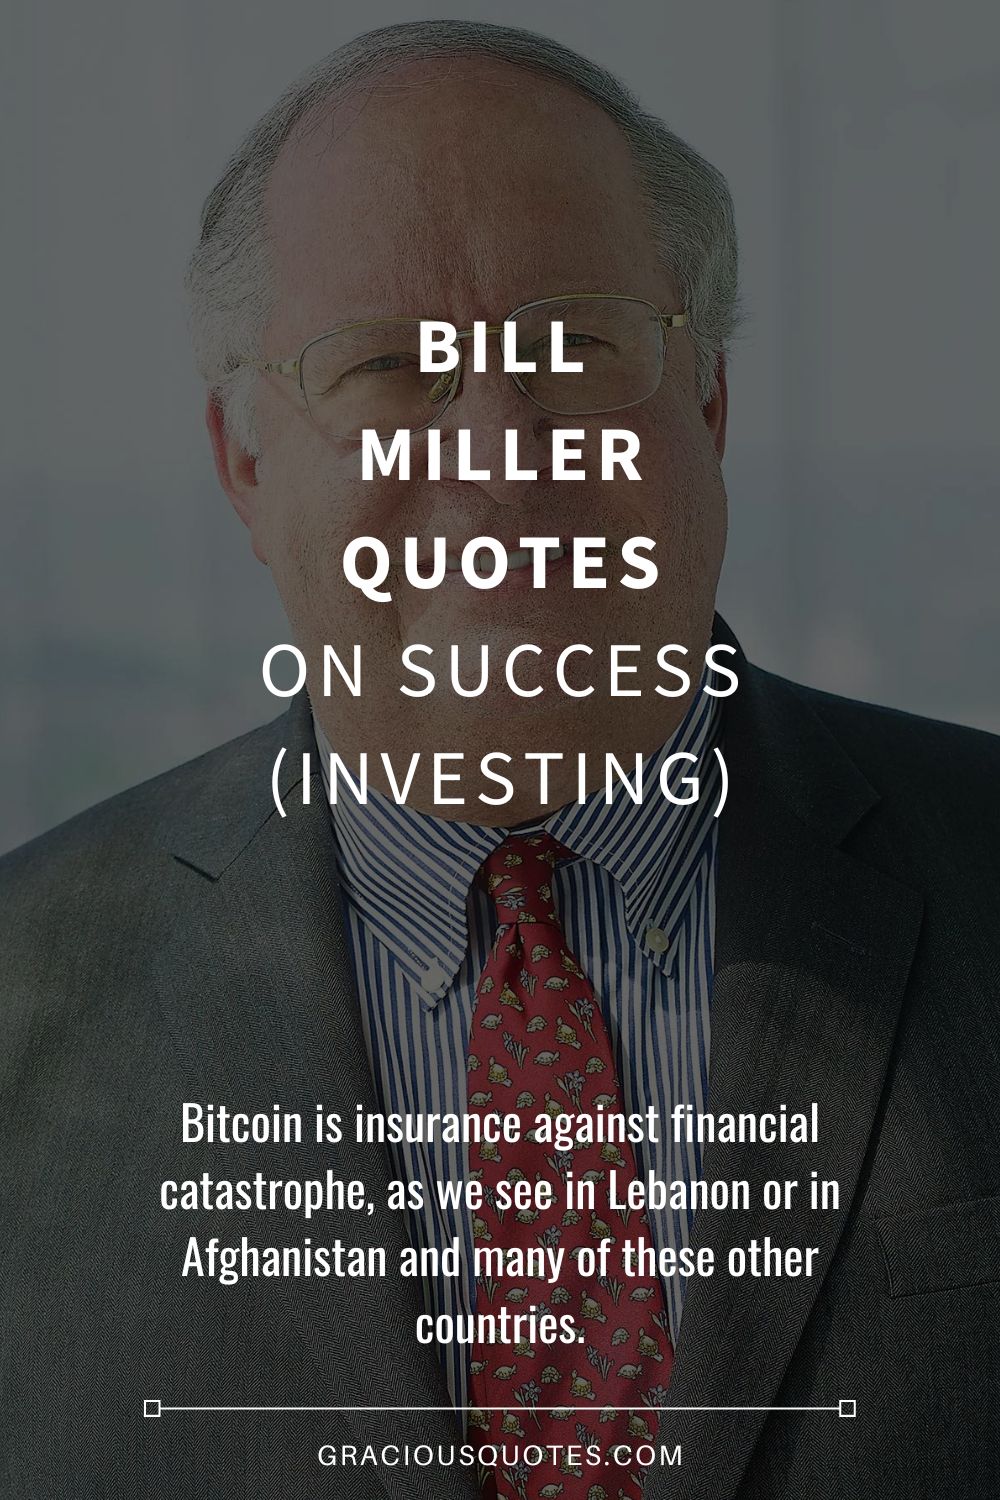 Bill Miller Quotes on Success (INVESTING) - Gracious Quotes